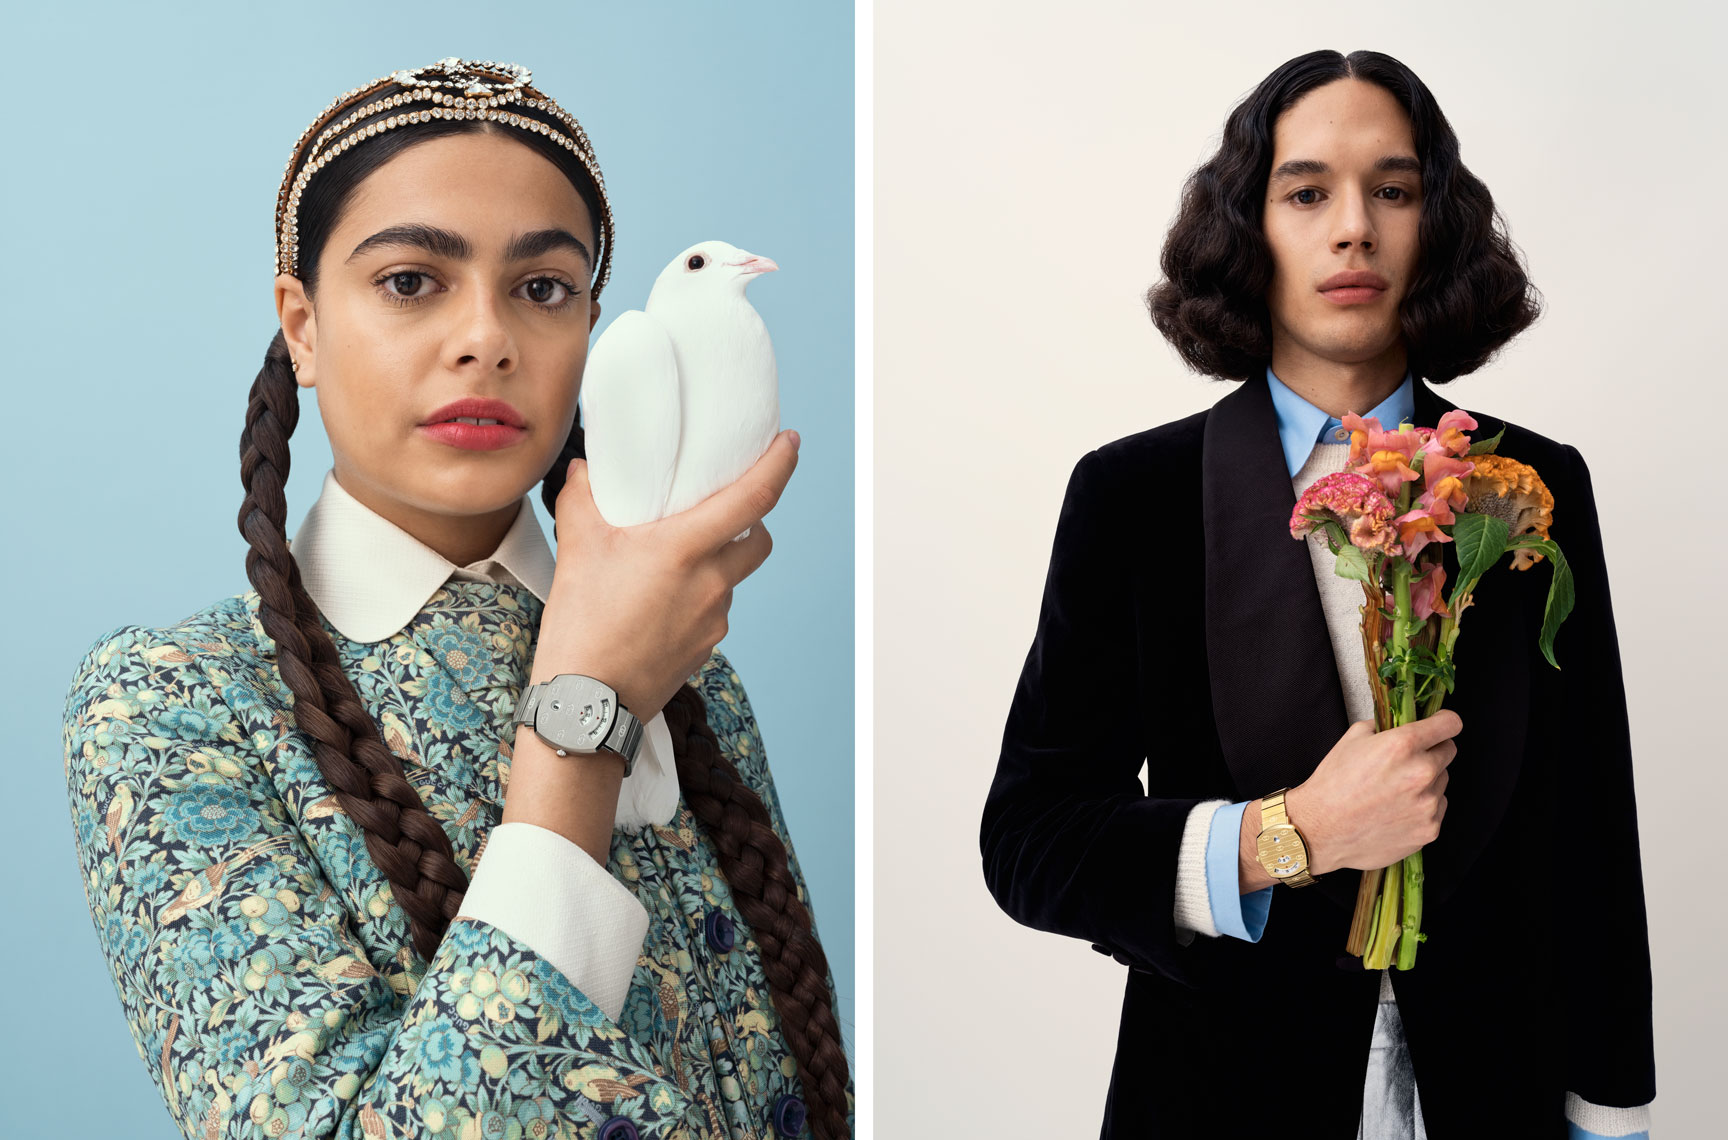 issie-gibbons-fashion-stylist-hypebeast-gucci-grip-editorial-campaign-dove-flowers